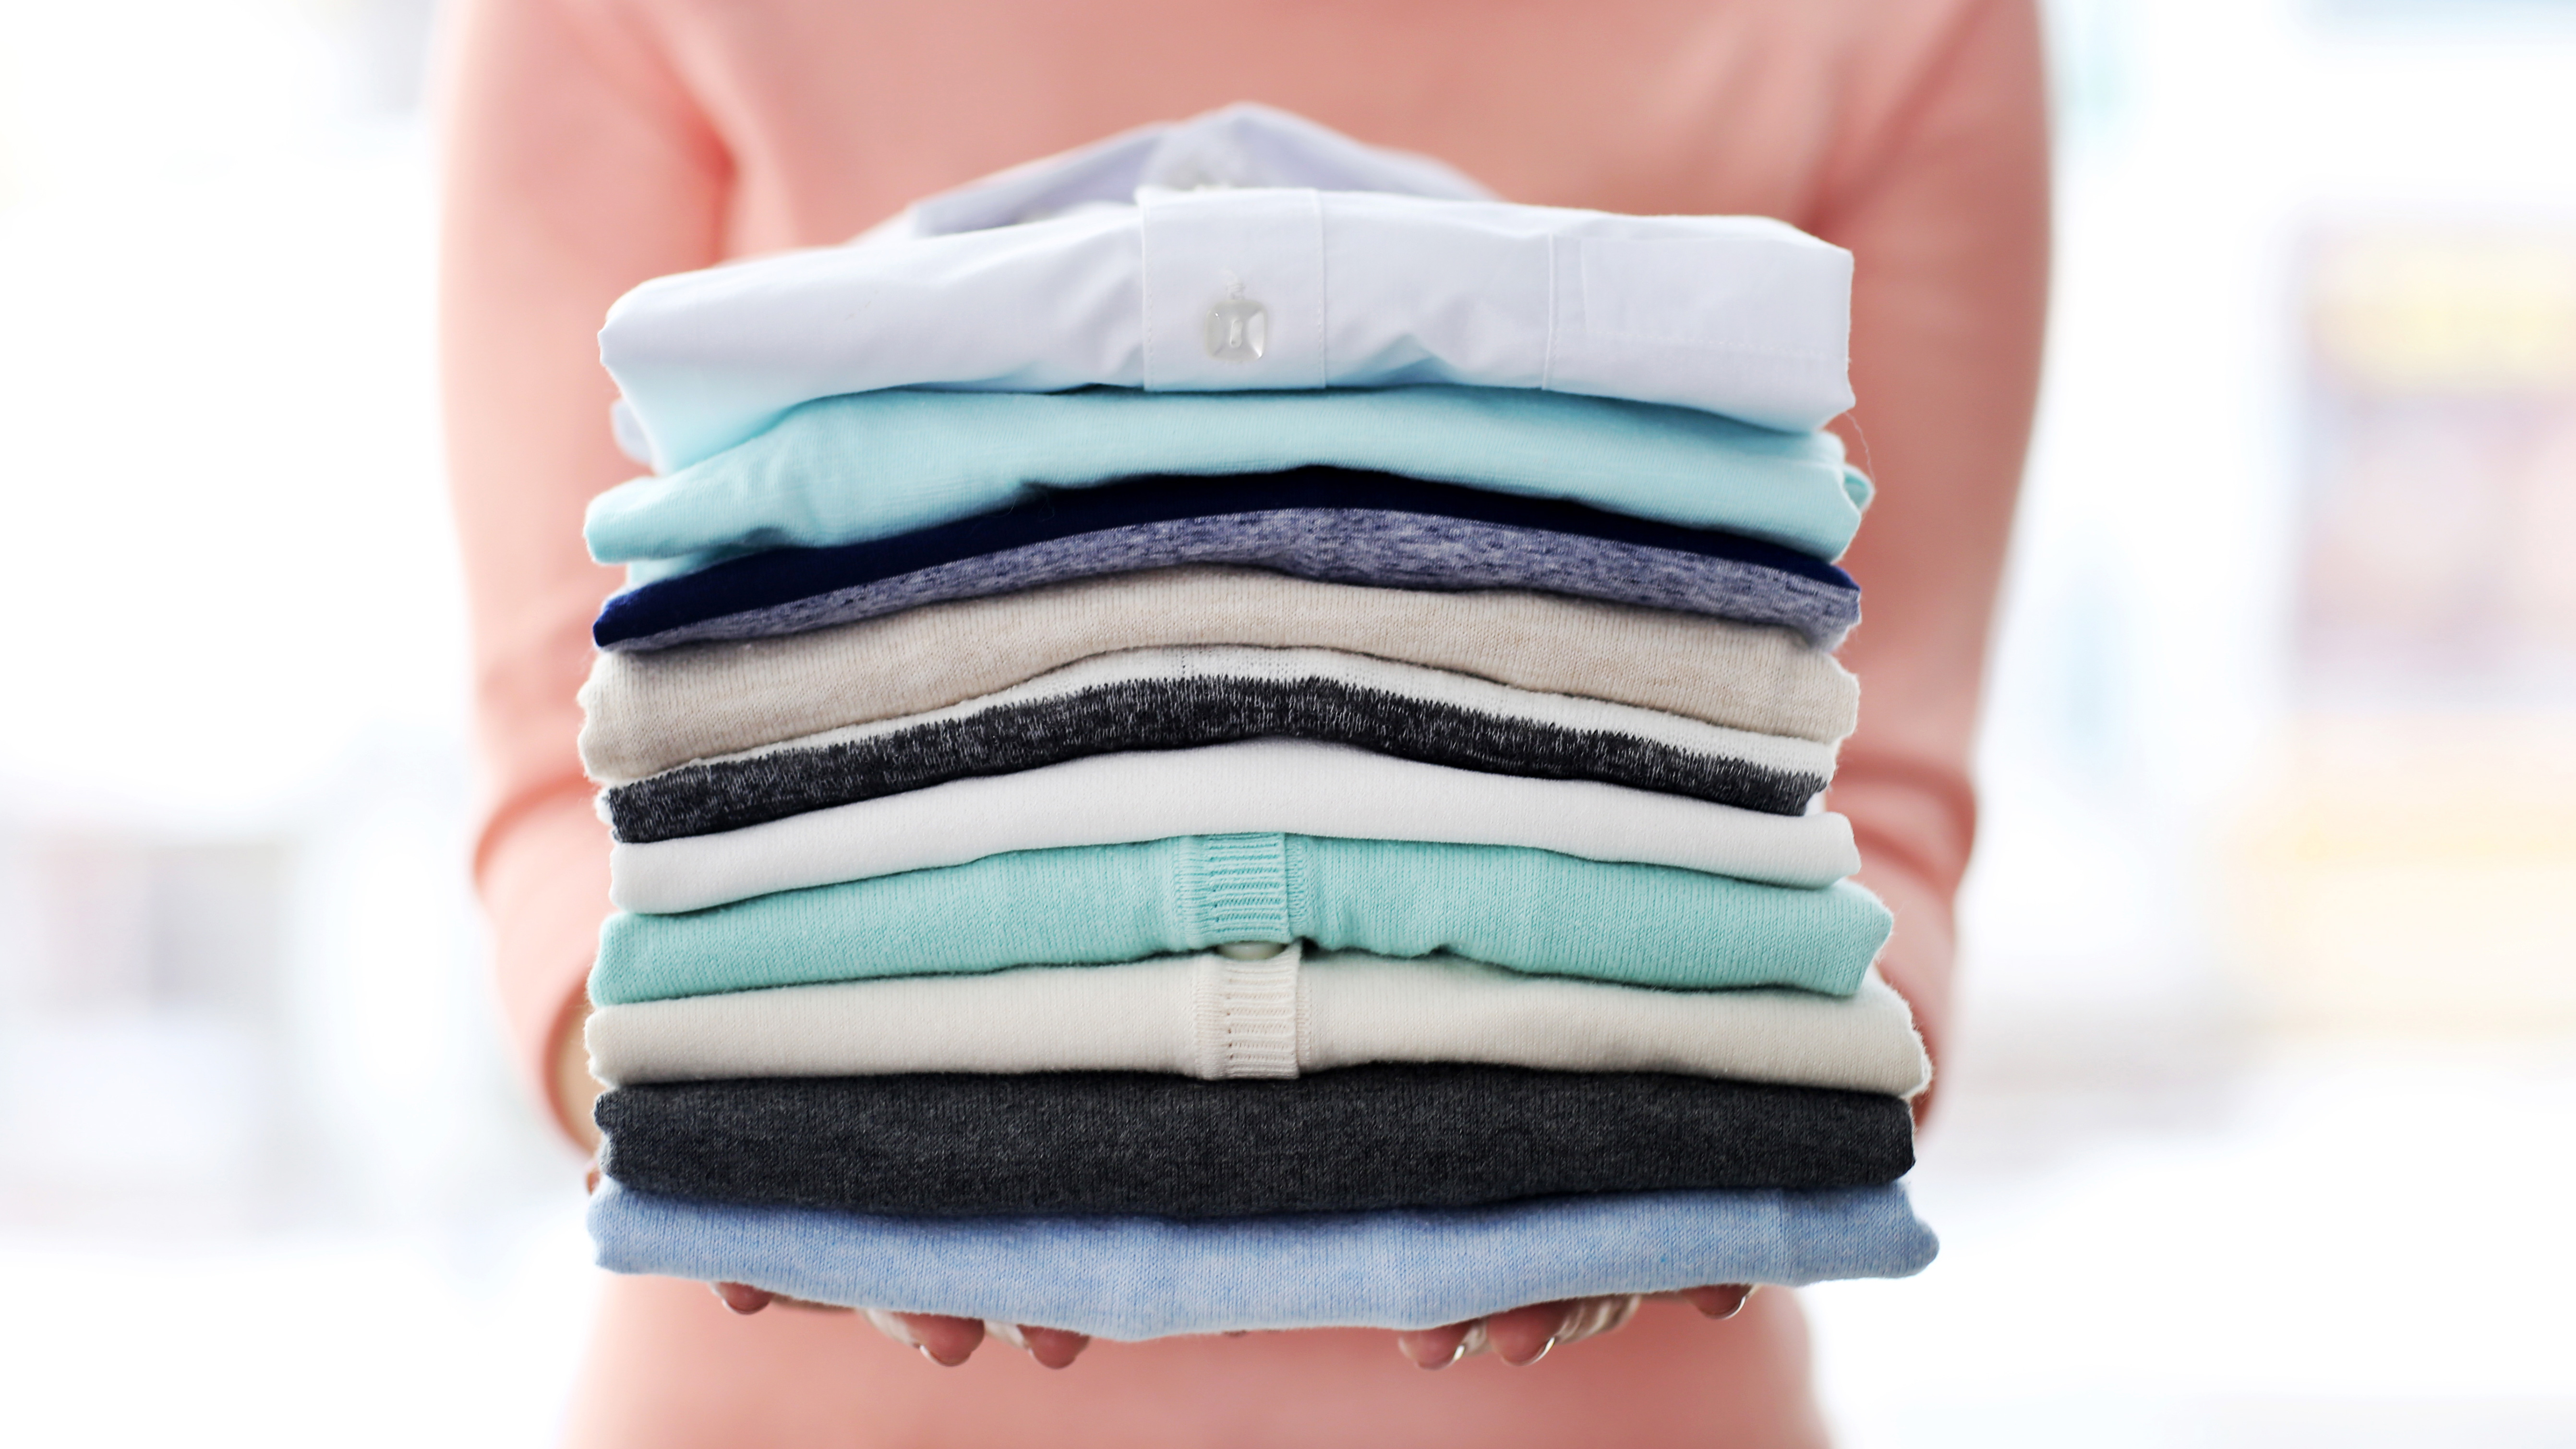 Coronavirus: lower your risk by properly cleaning your clothes | Real Homes